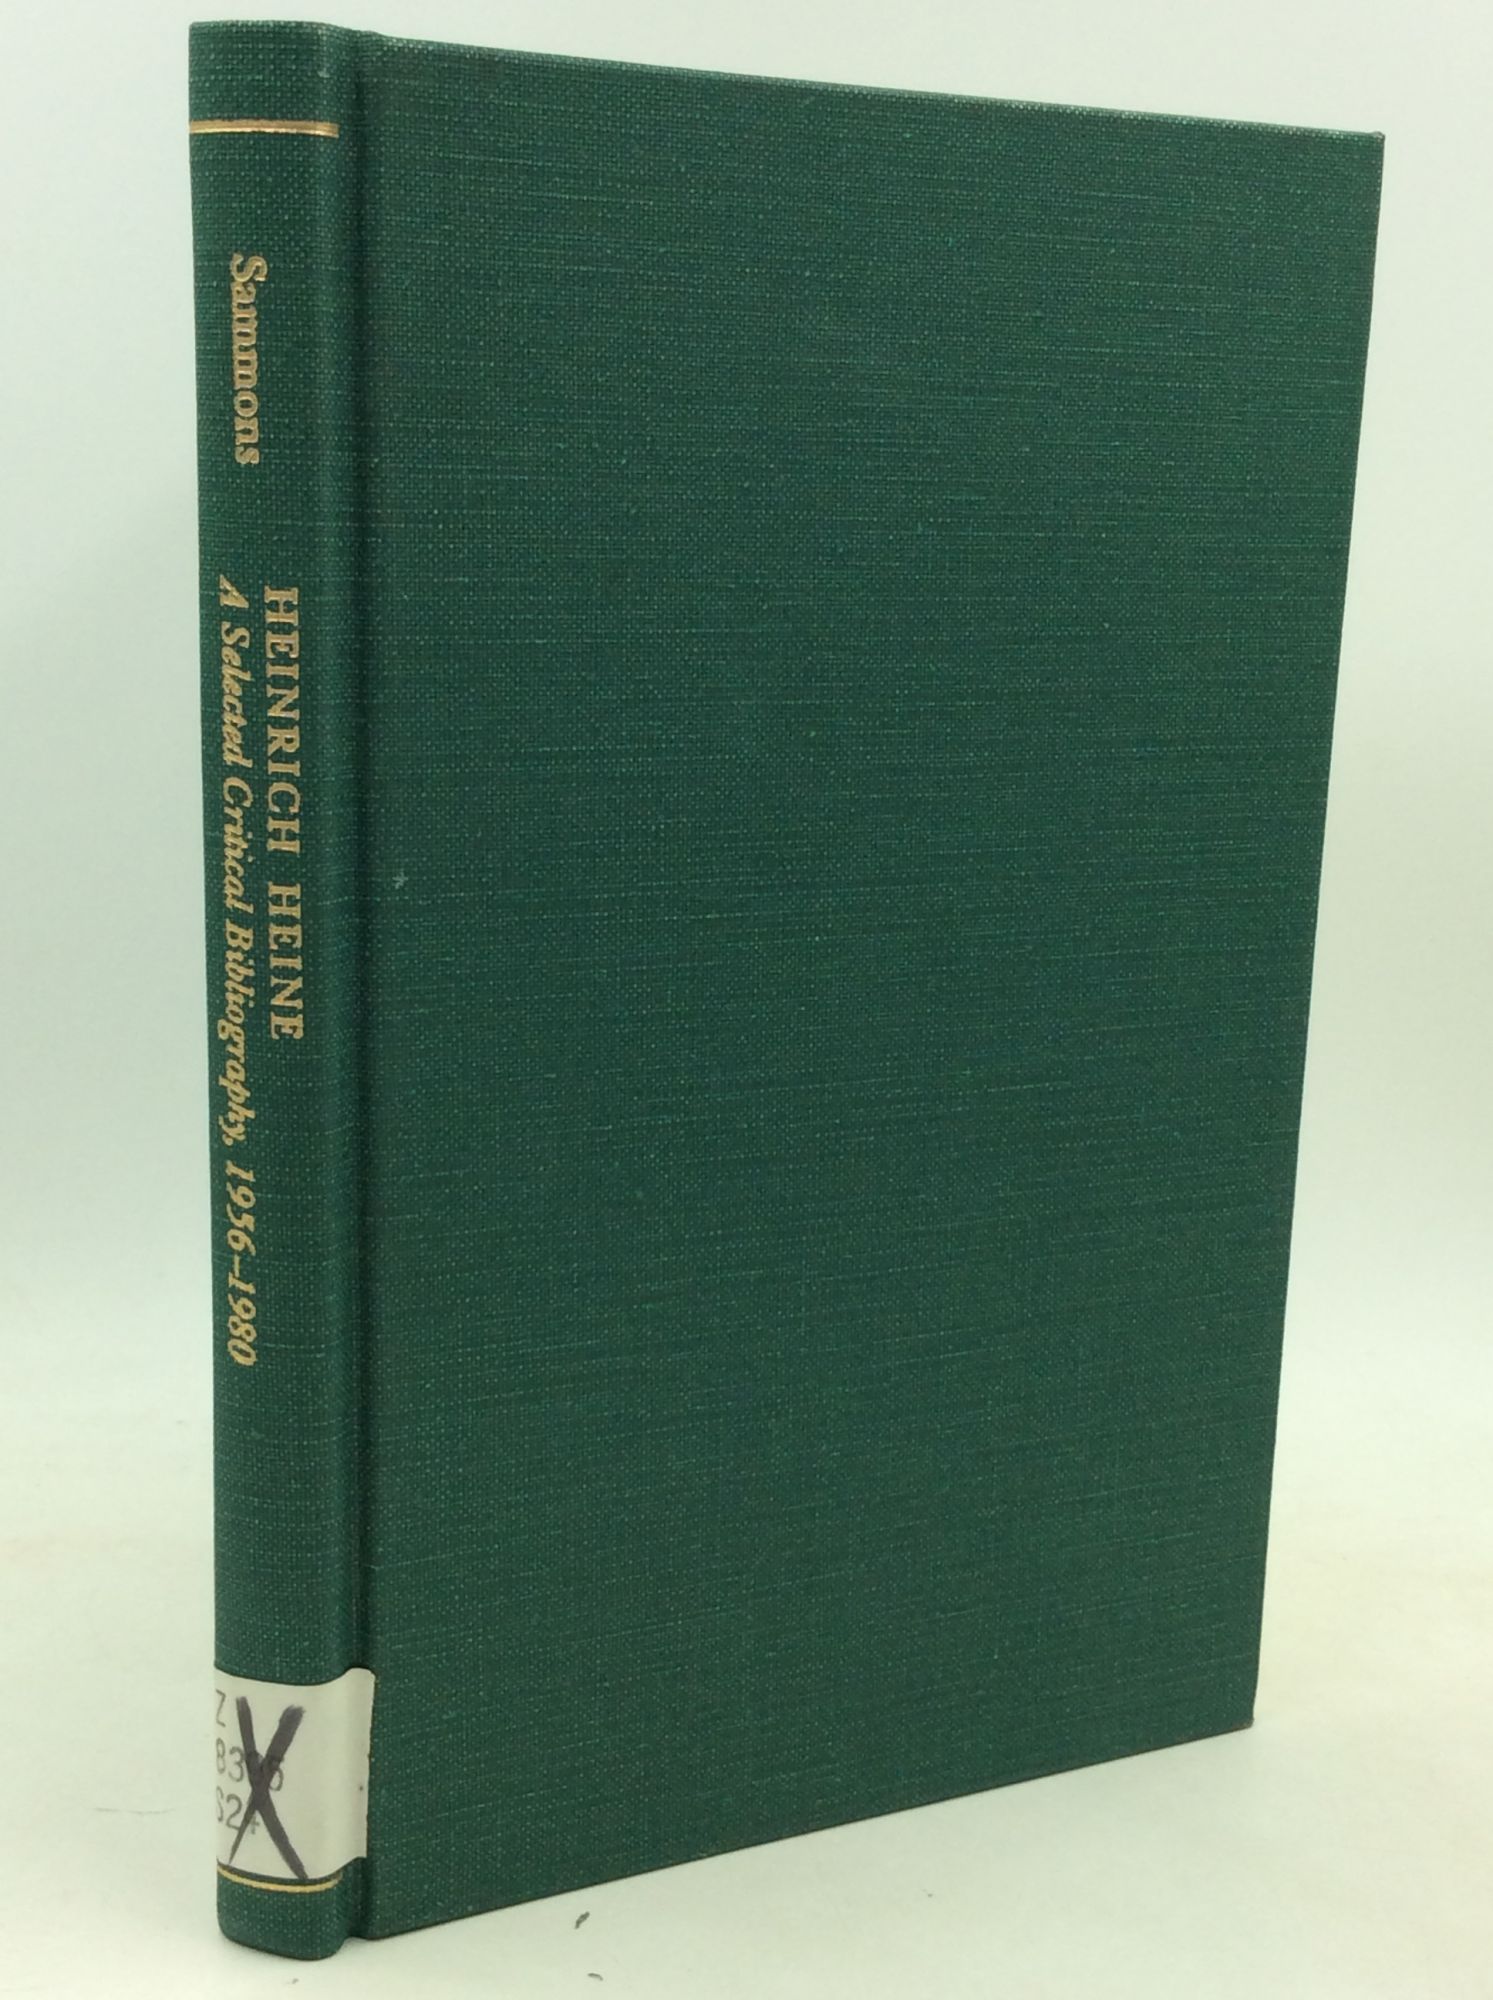 Heinrich Heine: A Selected Critical Bibliography of Secondary Literature, 1956-80